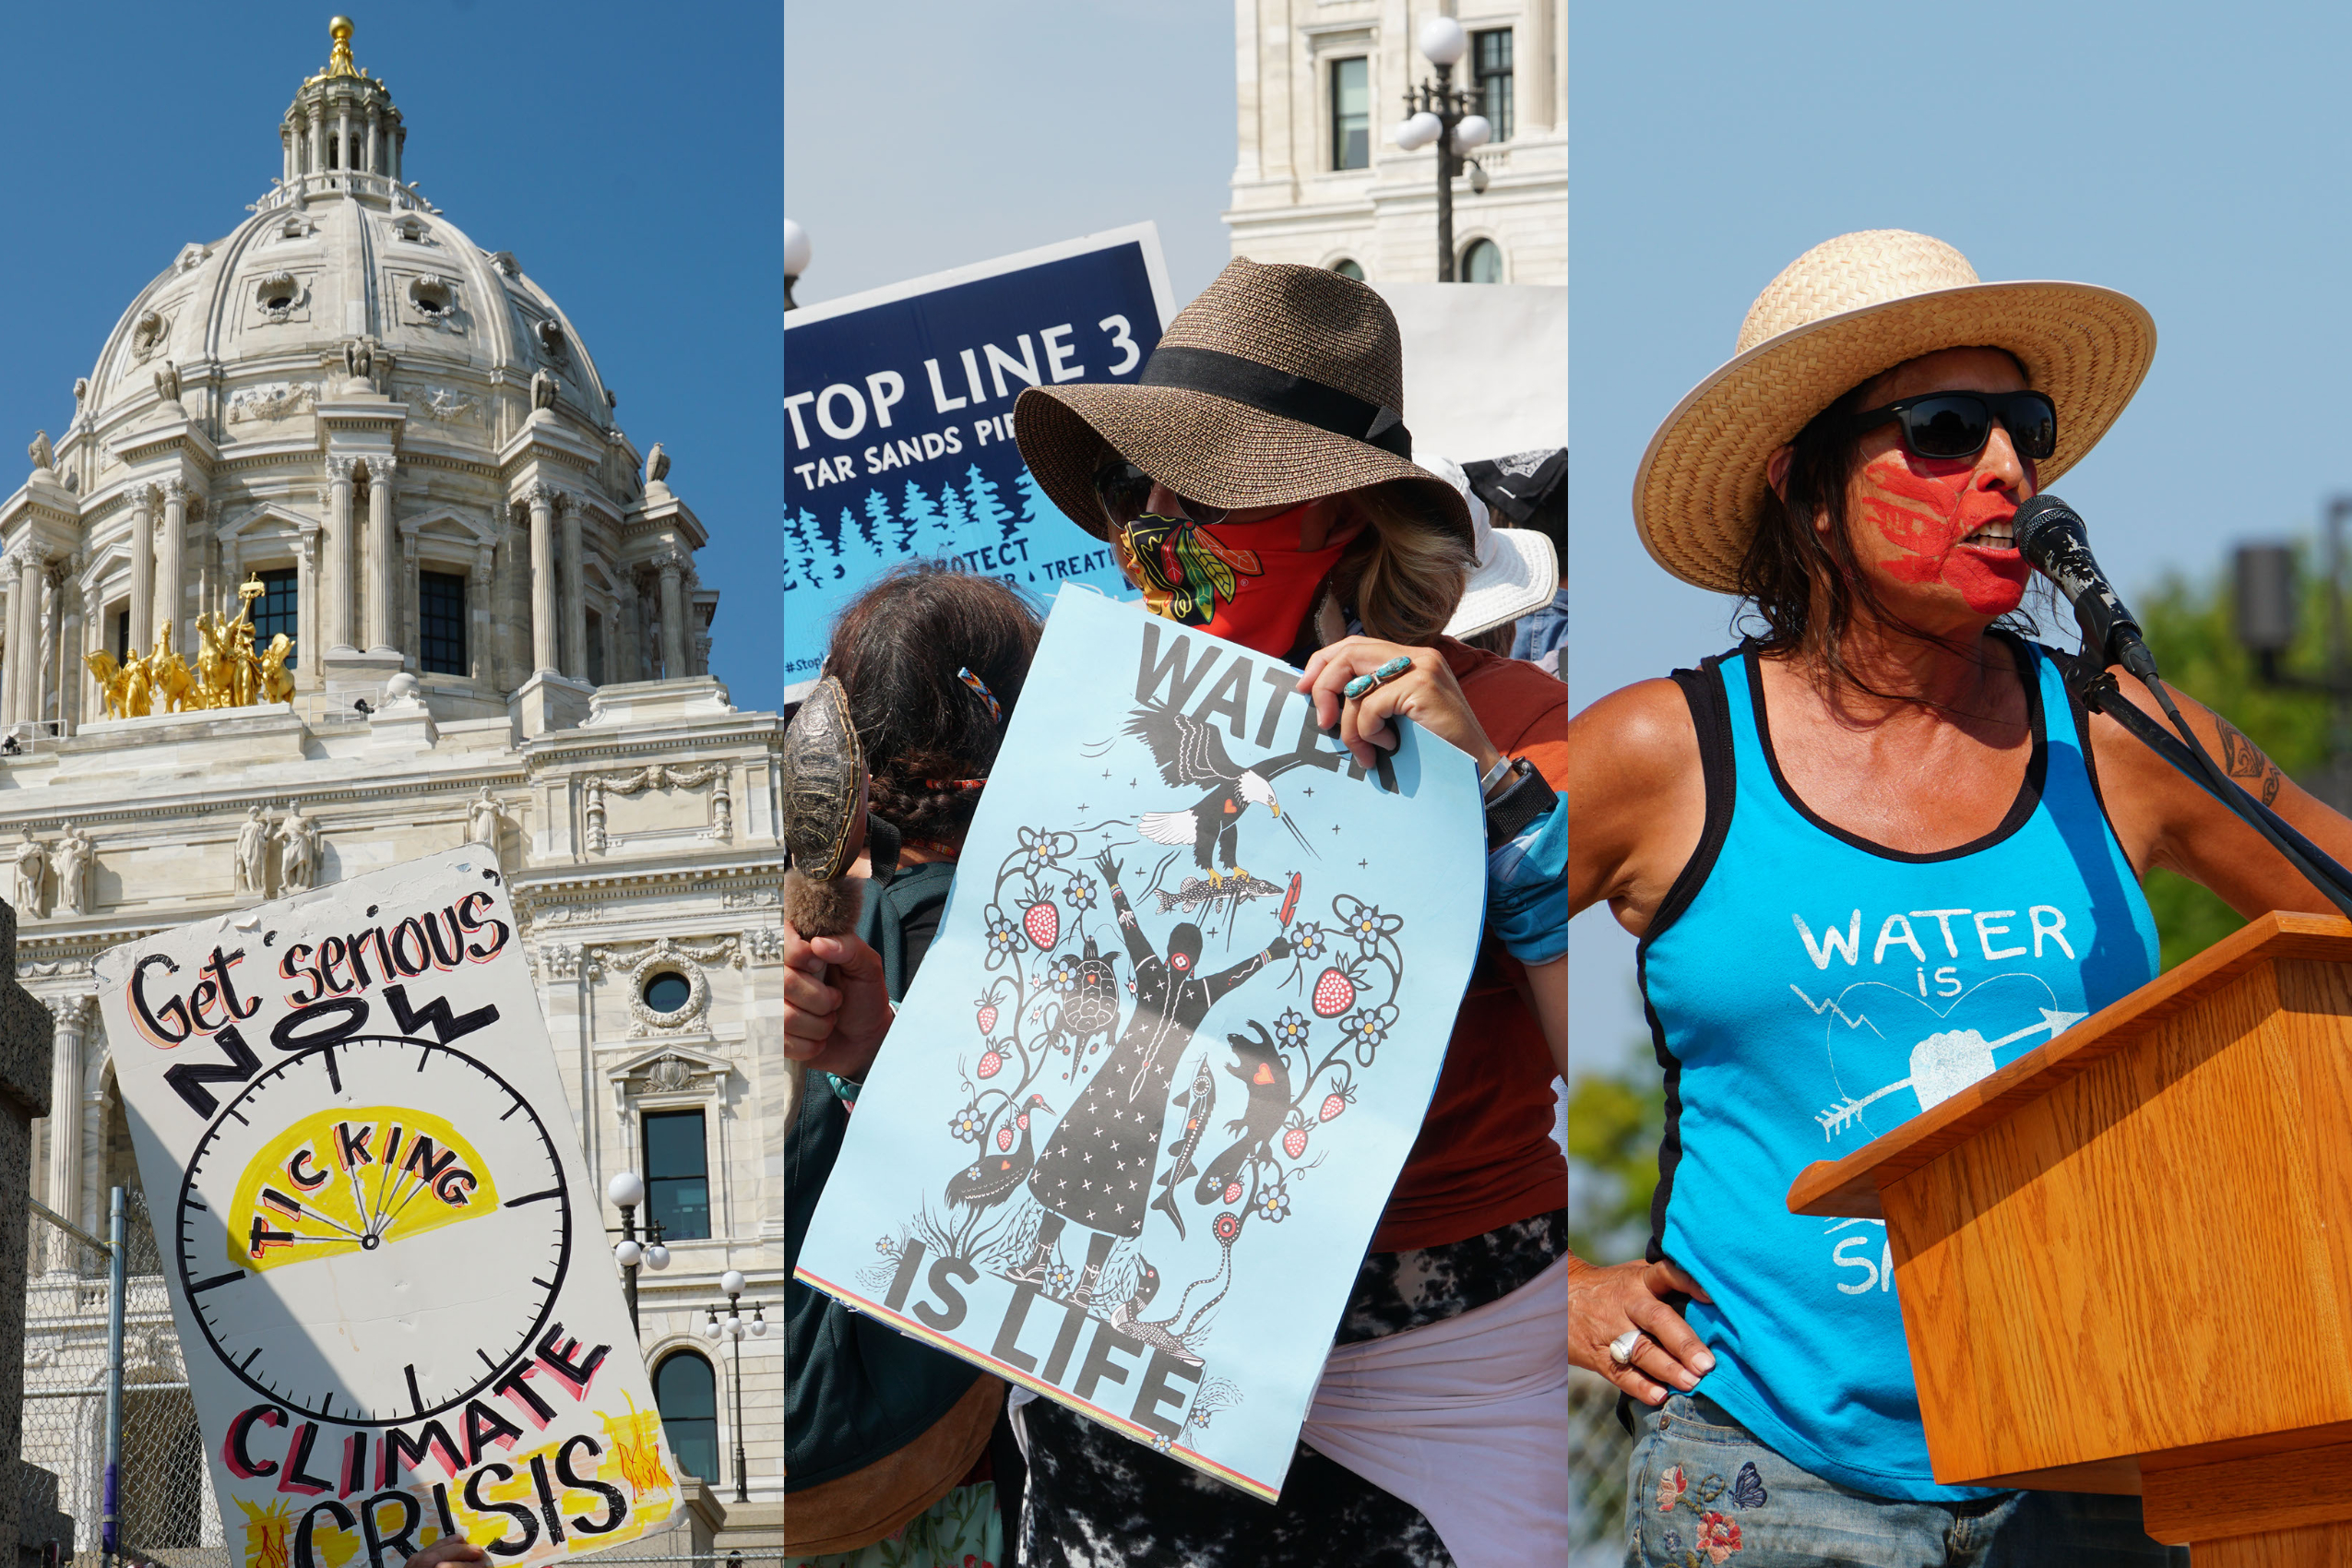 Image collage of Line 3 protest at Minnesota Capitol